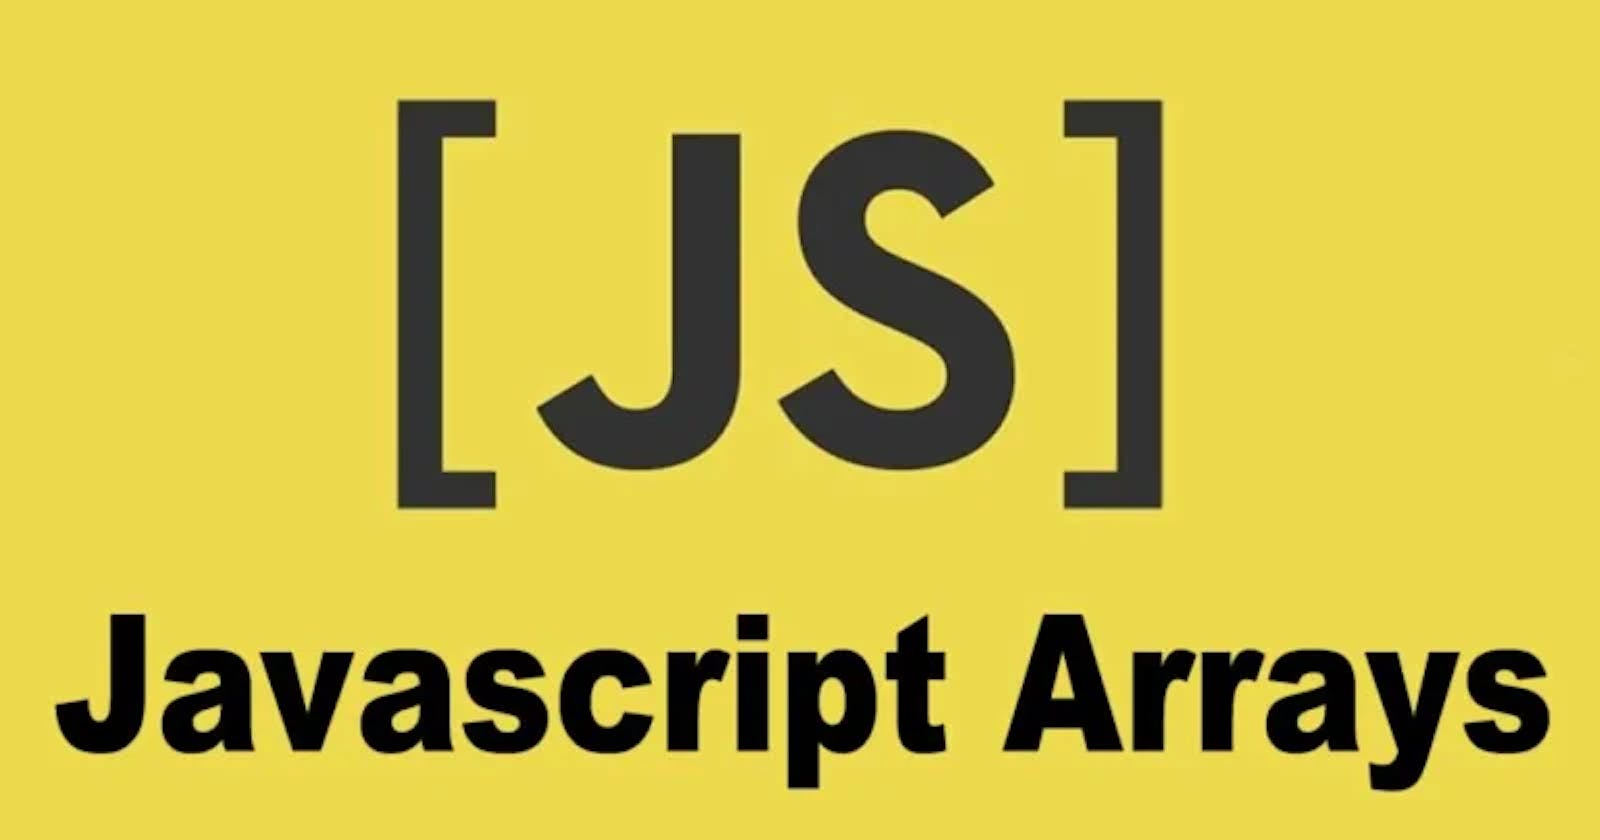 All about JavaScript Arrays